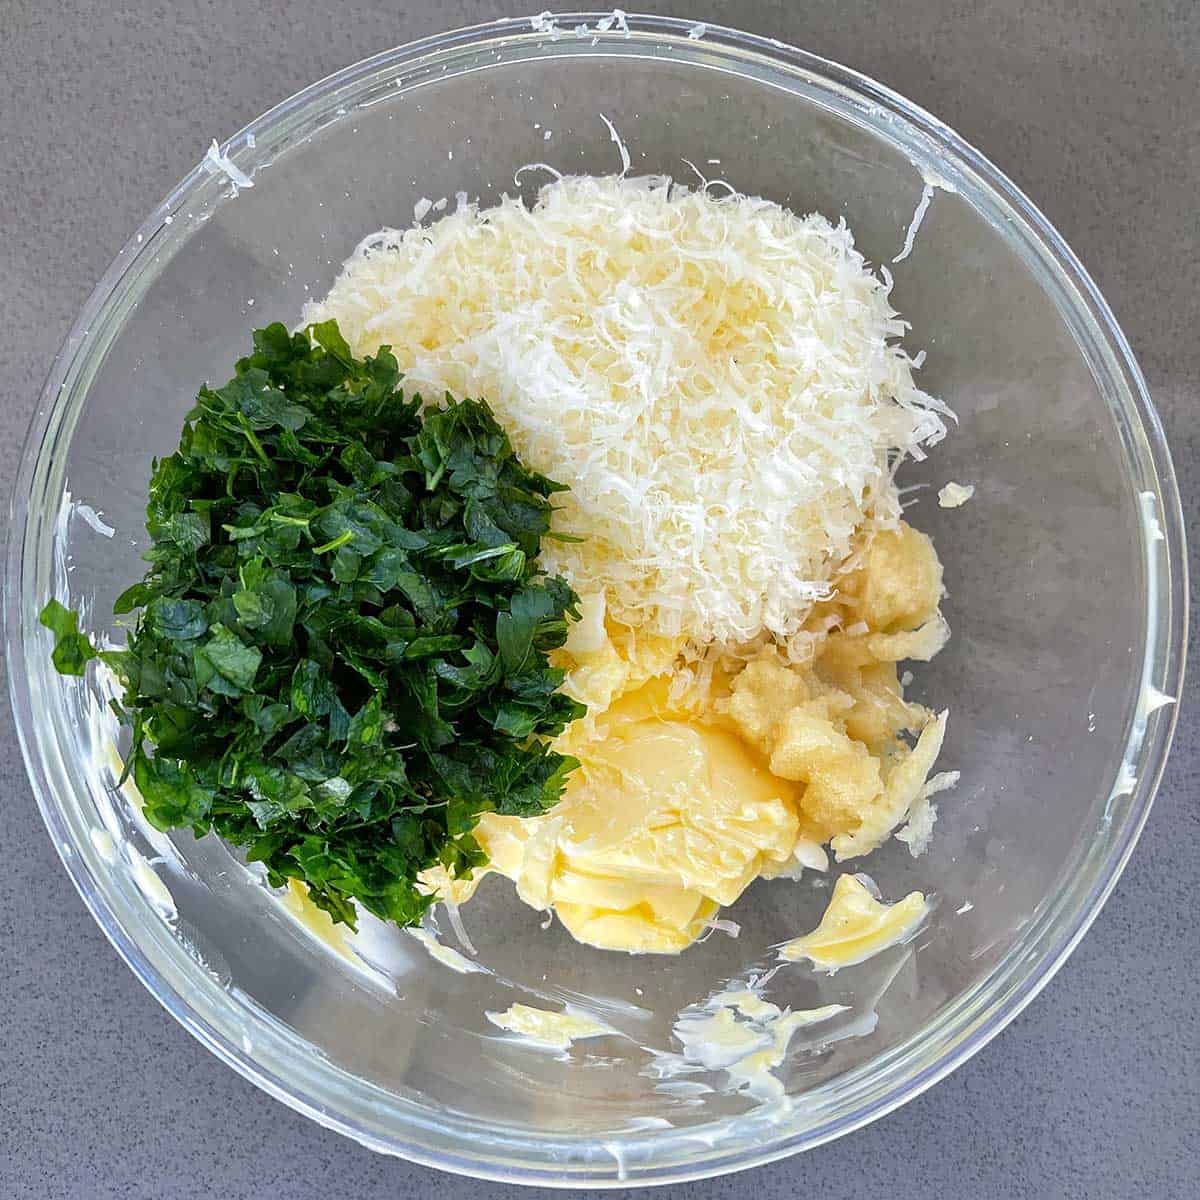 Butter, grated cheese, minced garlic and parsley in a glass bowl.